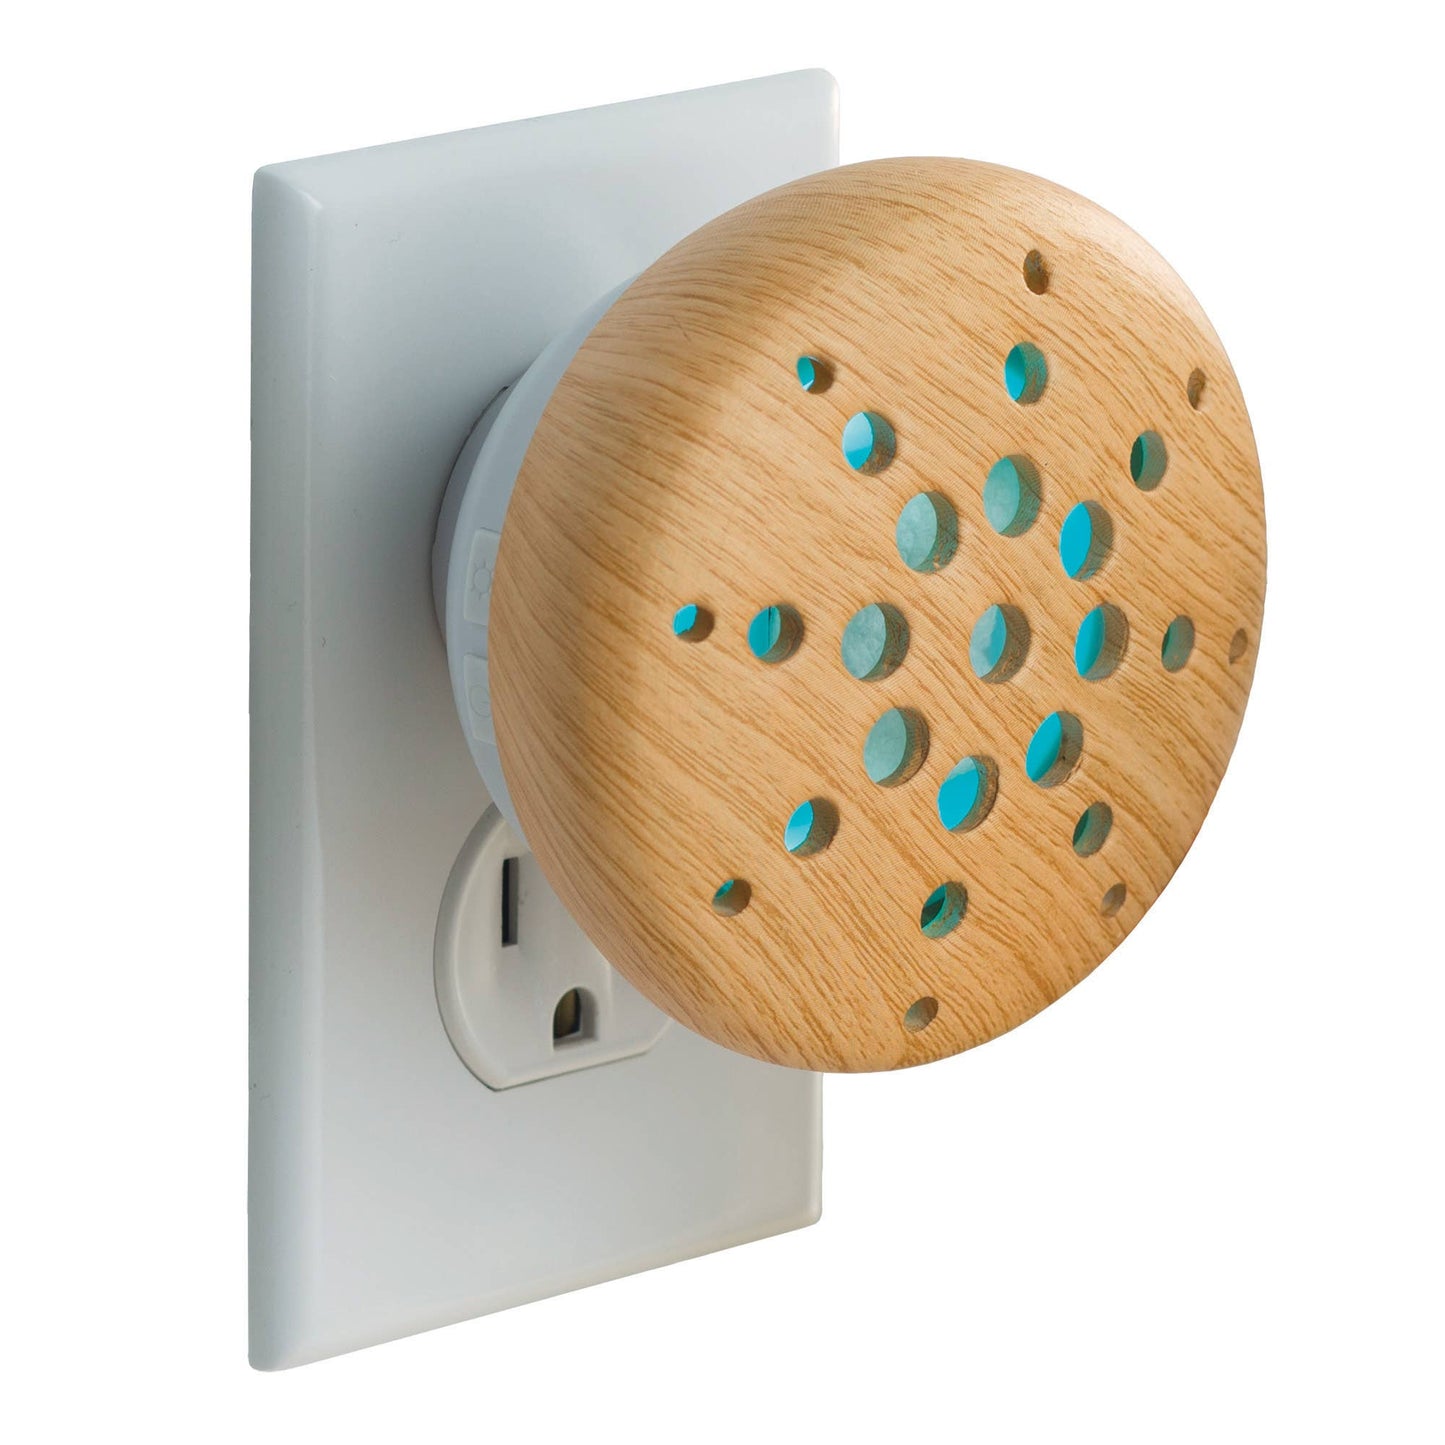 Essential Oil Pluggable Diffuser: Bamboo